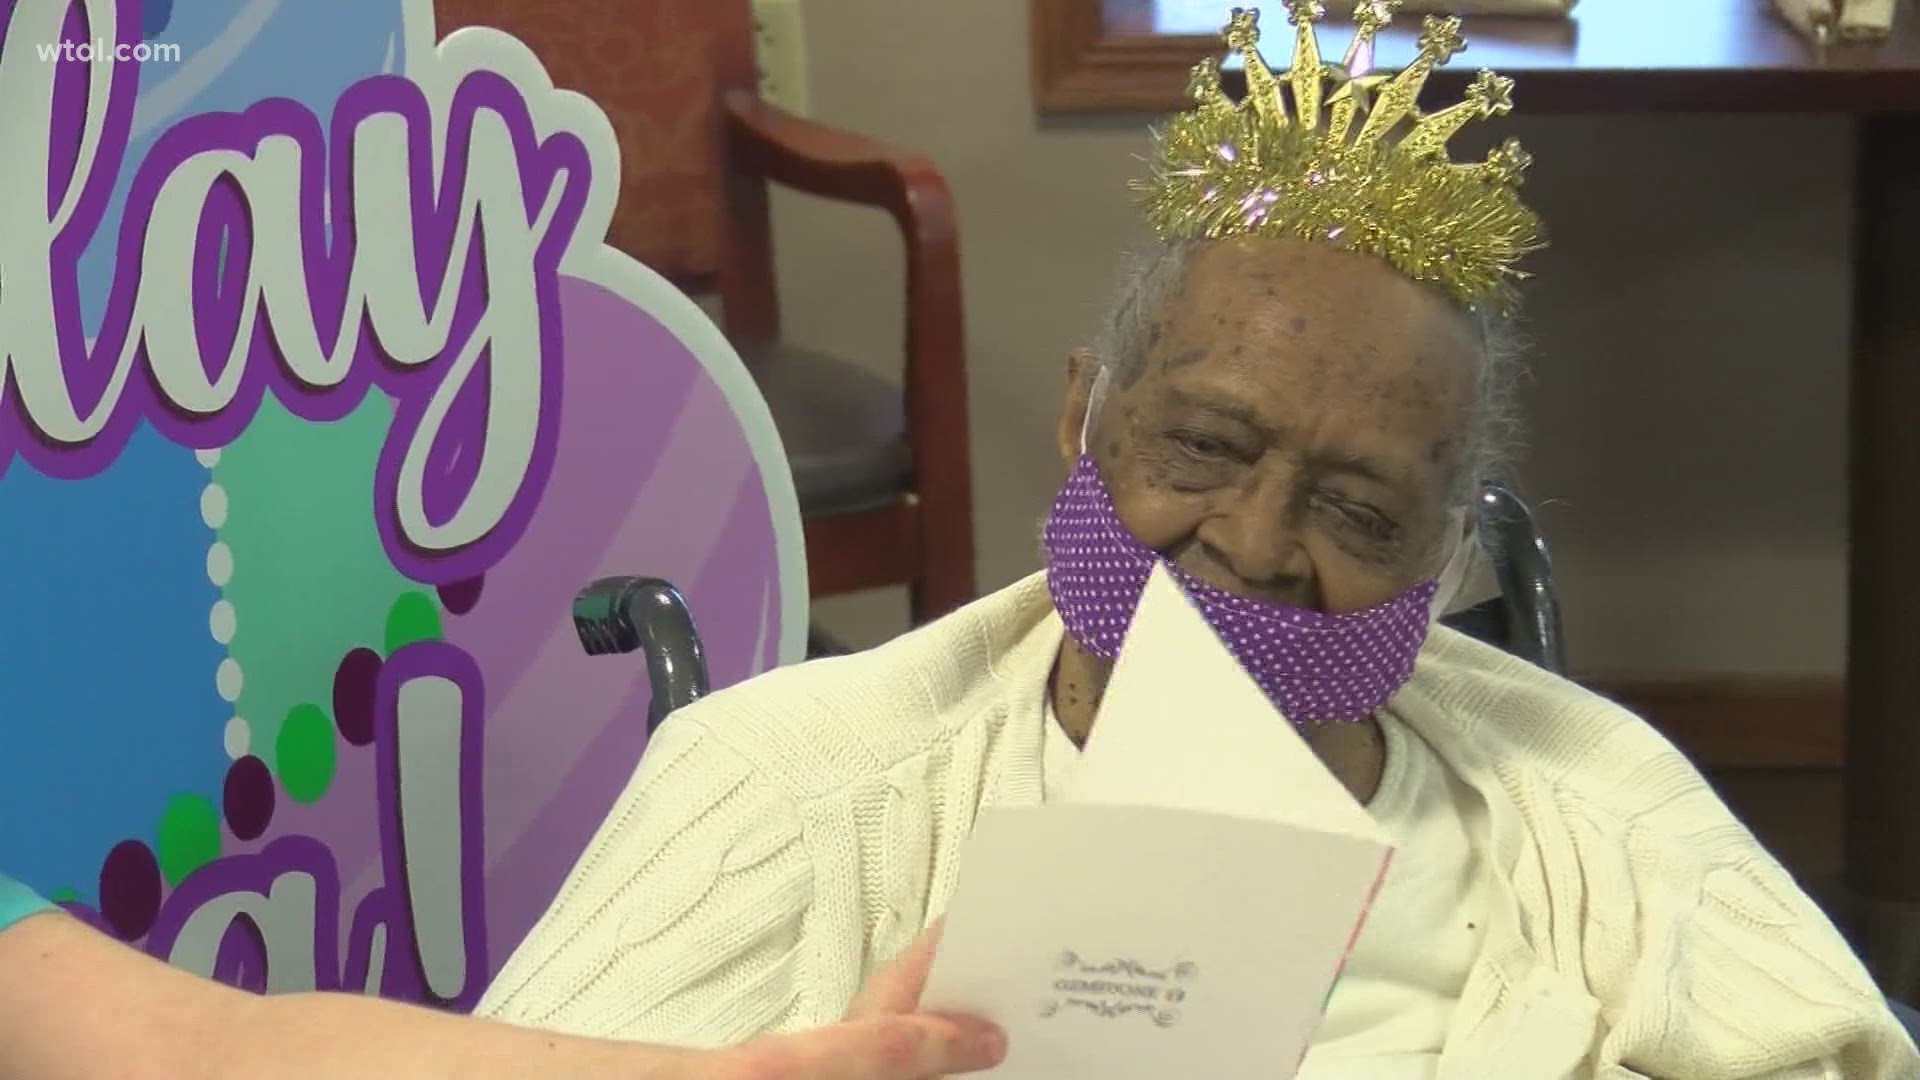 Thelma Coogler is a resident of Oakleaf Village in Sylvania and today, she turned 107. A Facebook post calling for cards resulted in well wishes from 32 states!